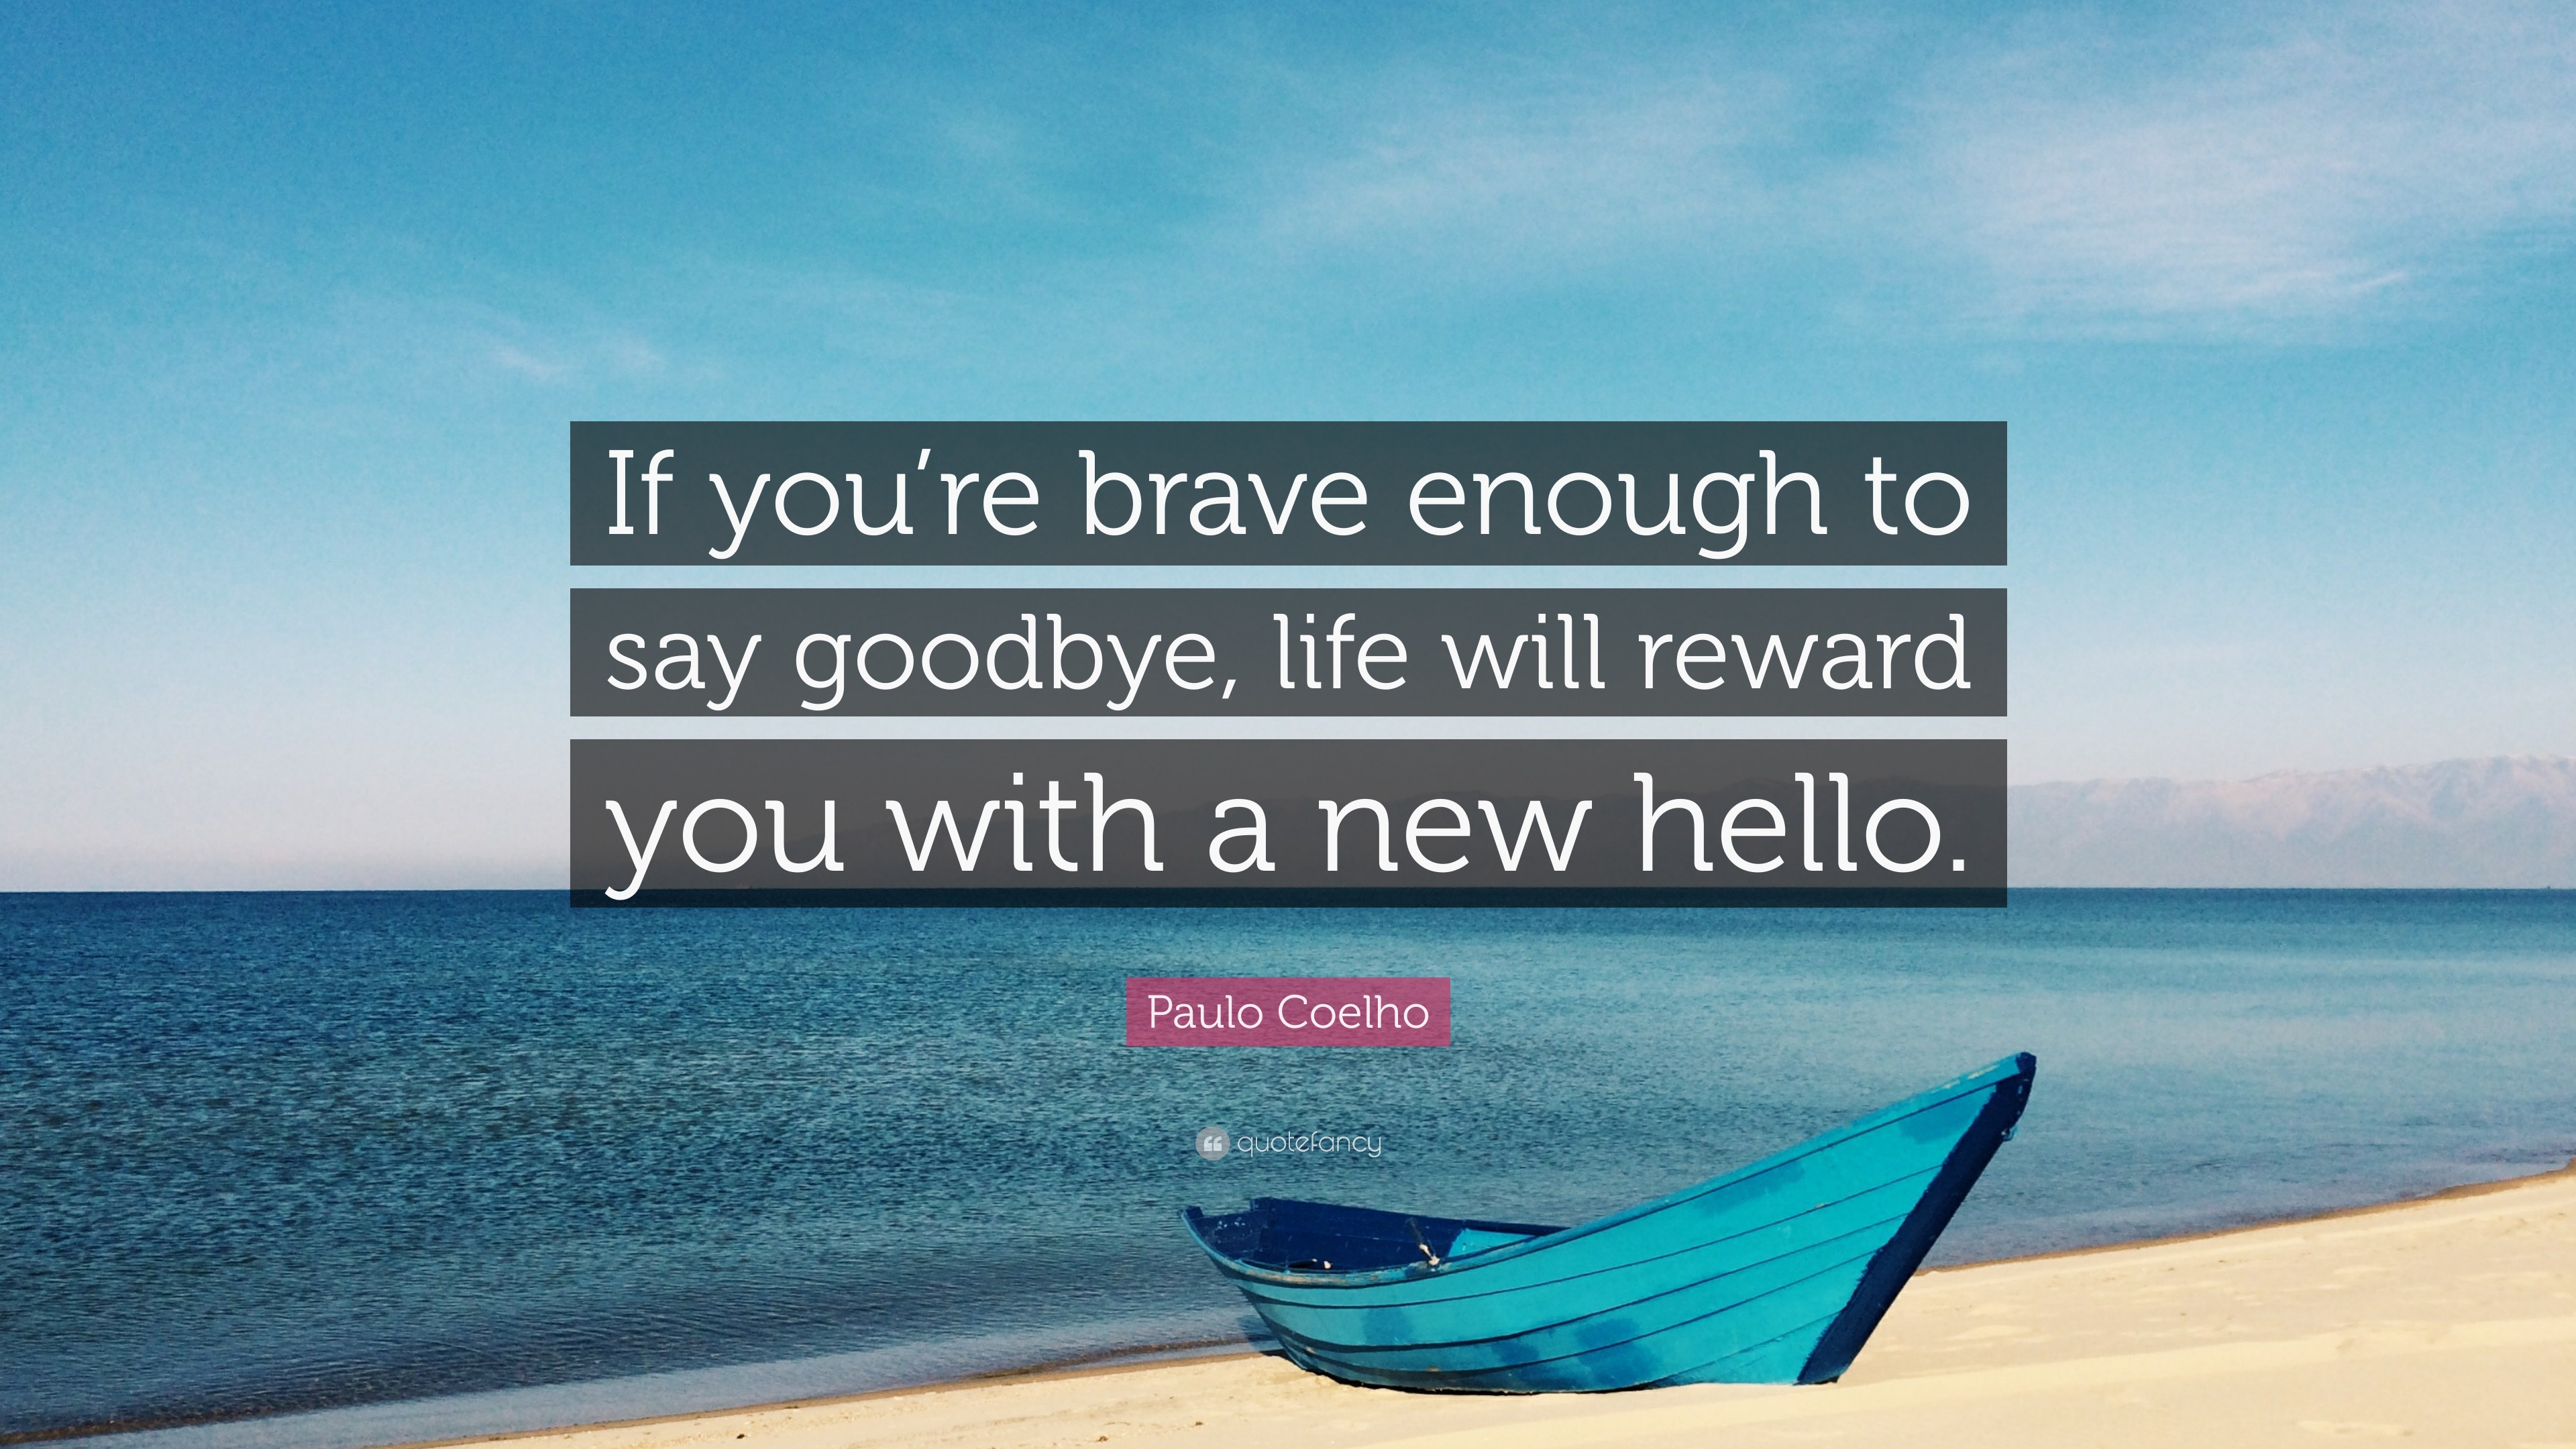 Paulo Coelho Quote: “If you’re brave enough to say goodbye, life will